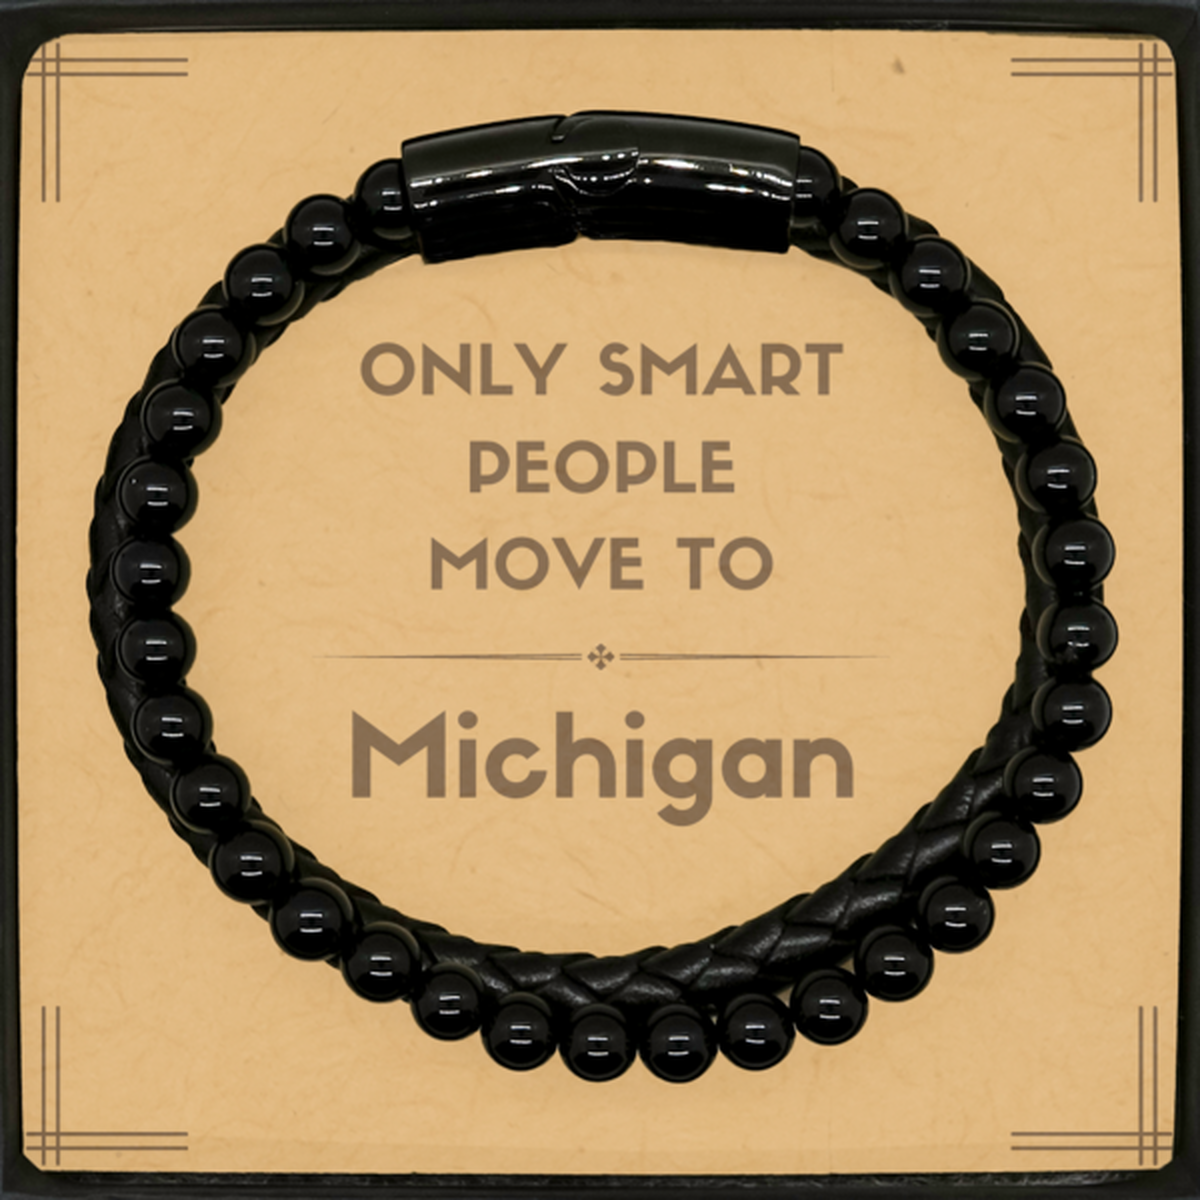 Only smart people move to Michigan Stone Leather Bracelets, Message Card Gifts For Michigan, Move to Michigan Gifts for Friends Coworker Funny Saying Quote